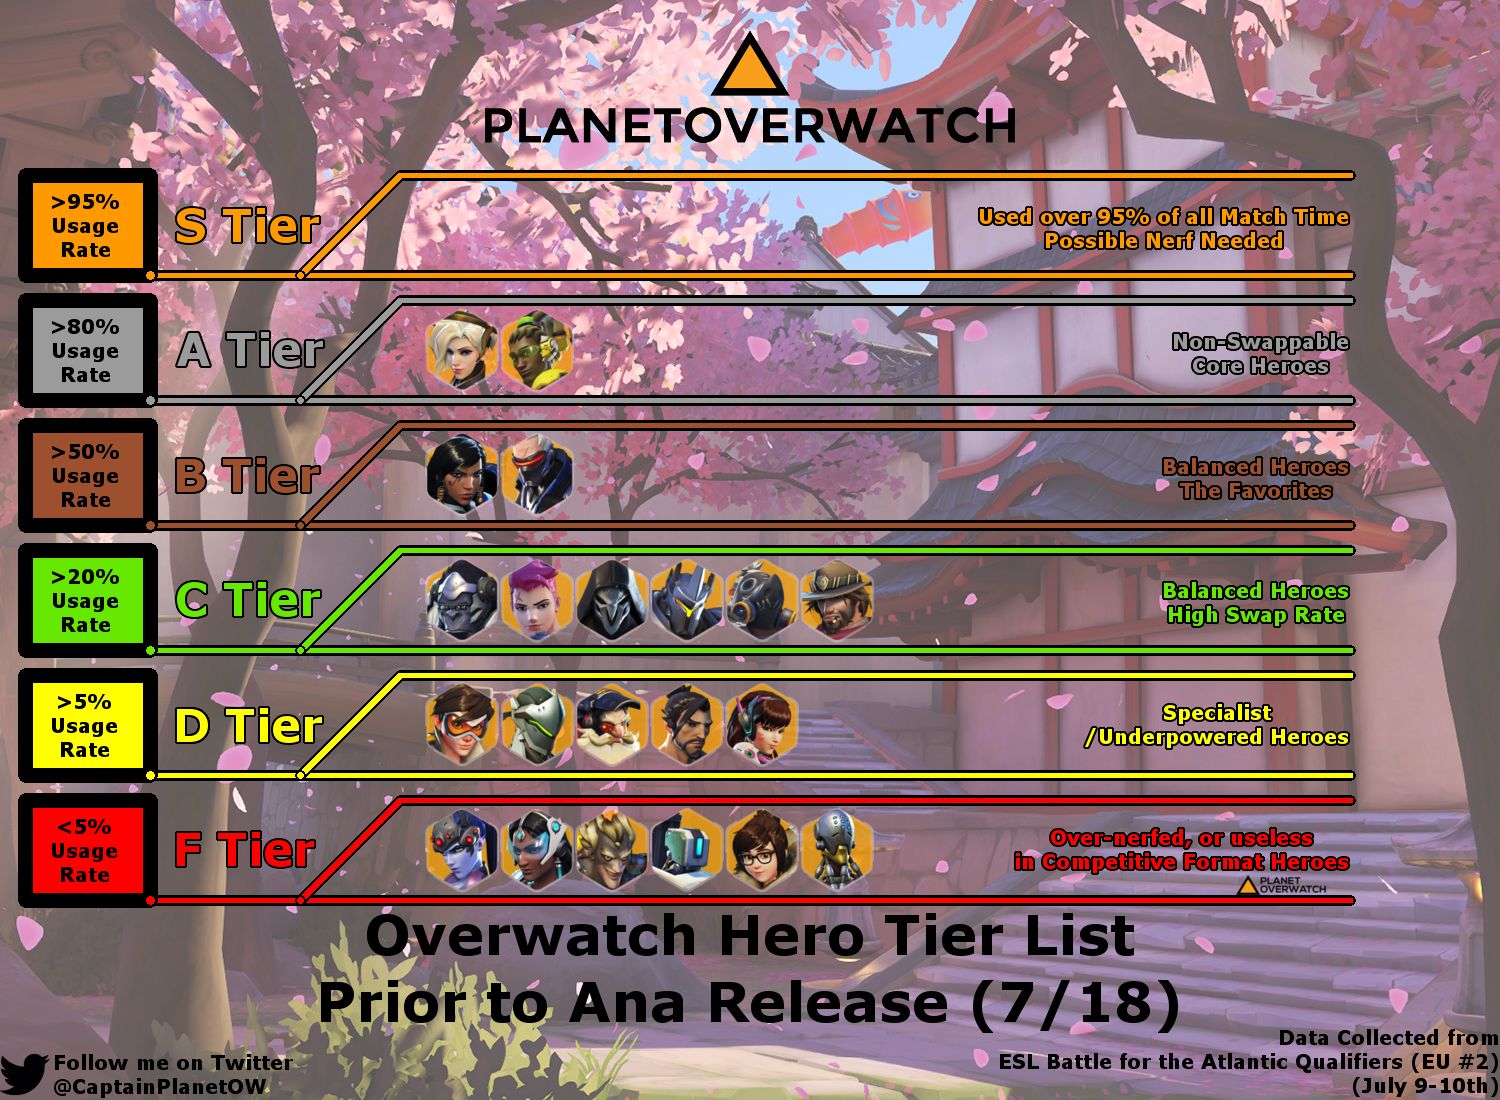 19 Overwatch Tier List And Meta Report The Eve Of Ana Planetoverwatch - topics matching getting the best rank in roblox reaper